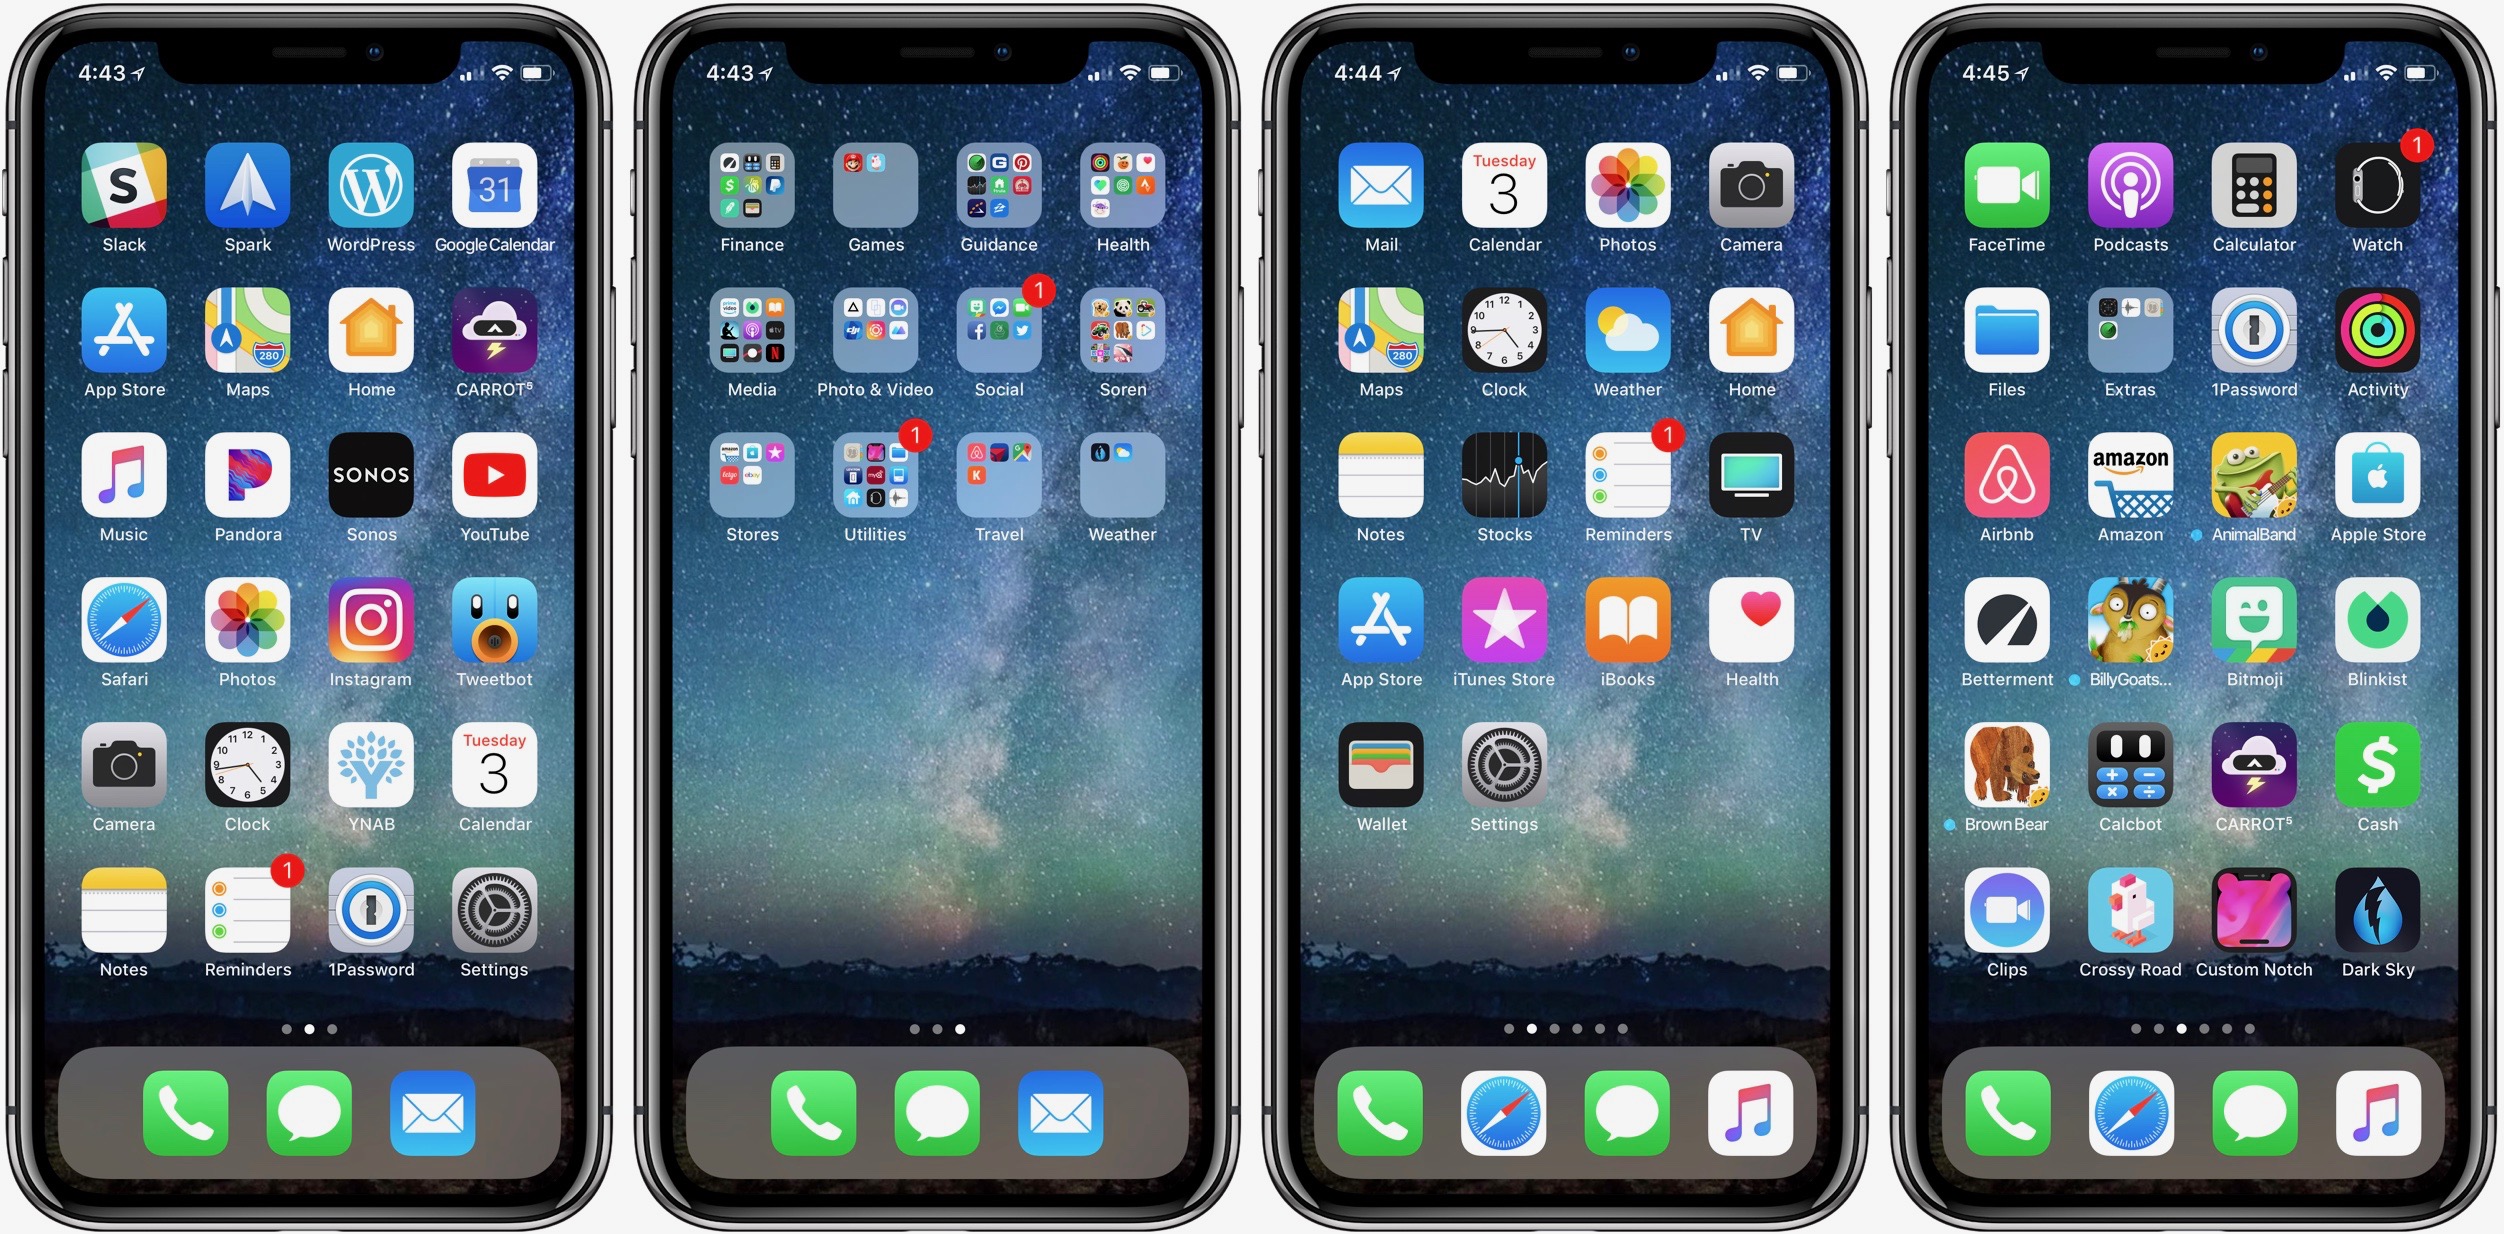 How to restore the default Home screen layout on iPhone 